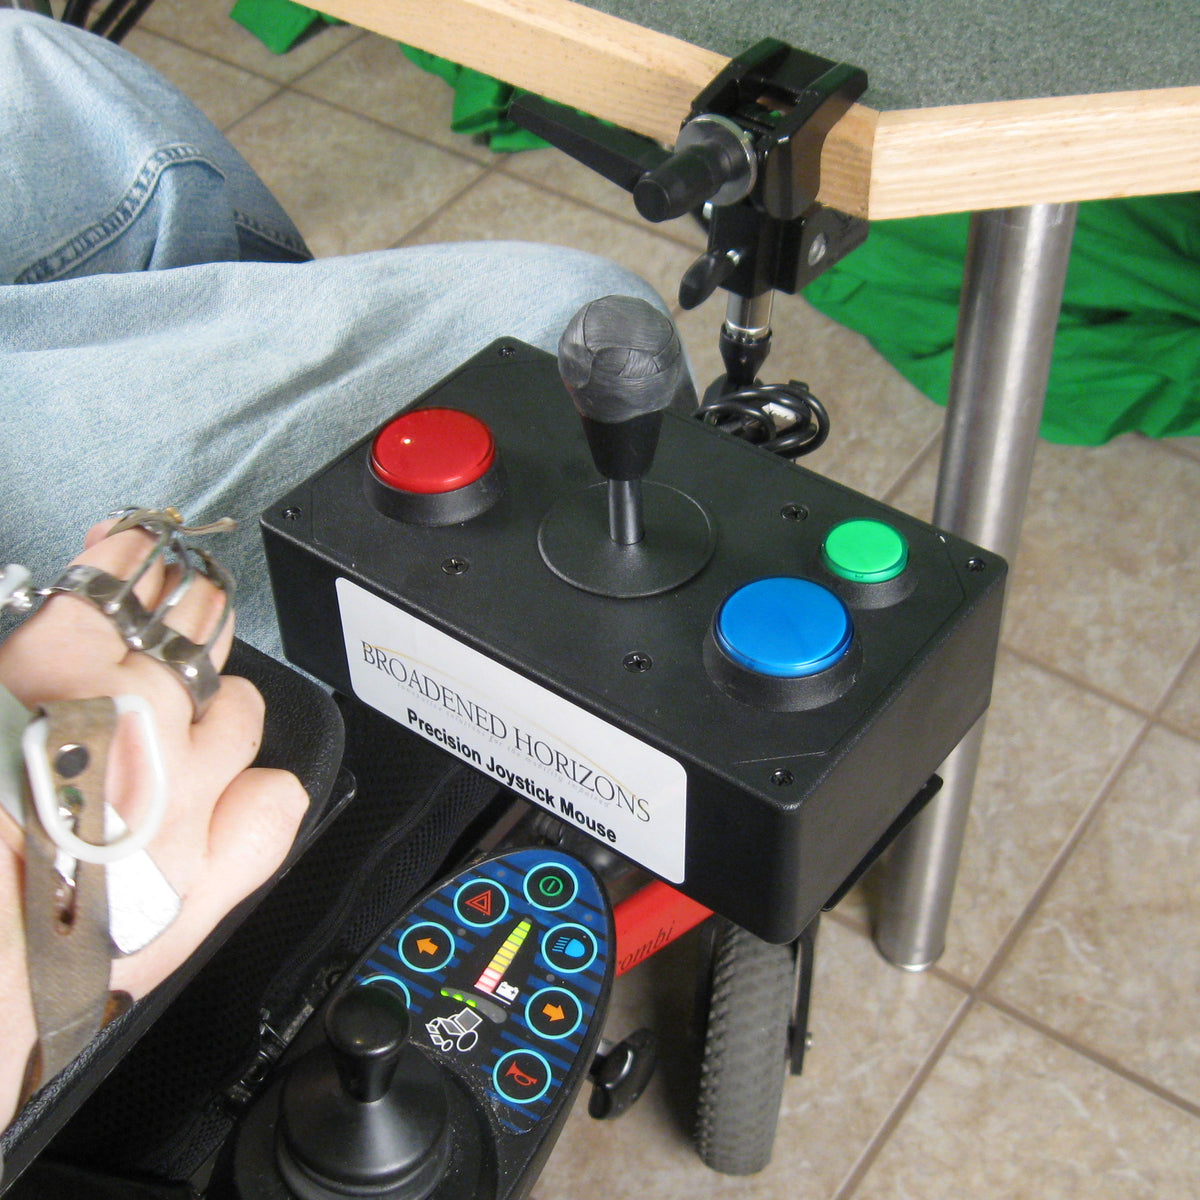 Onpoint Precision Joystick Mouse and Game Controller